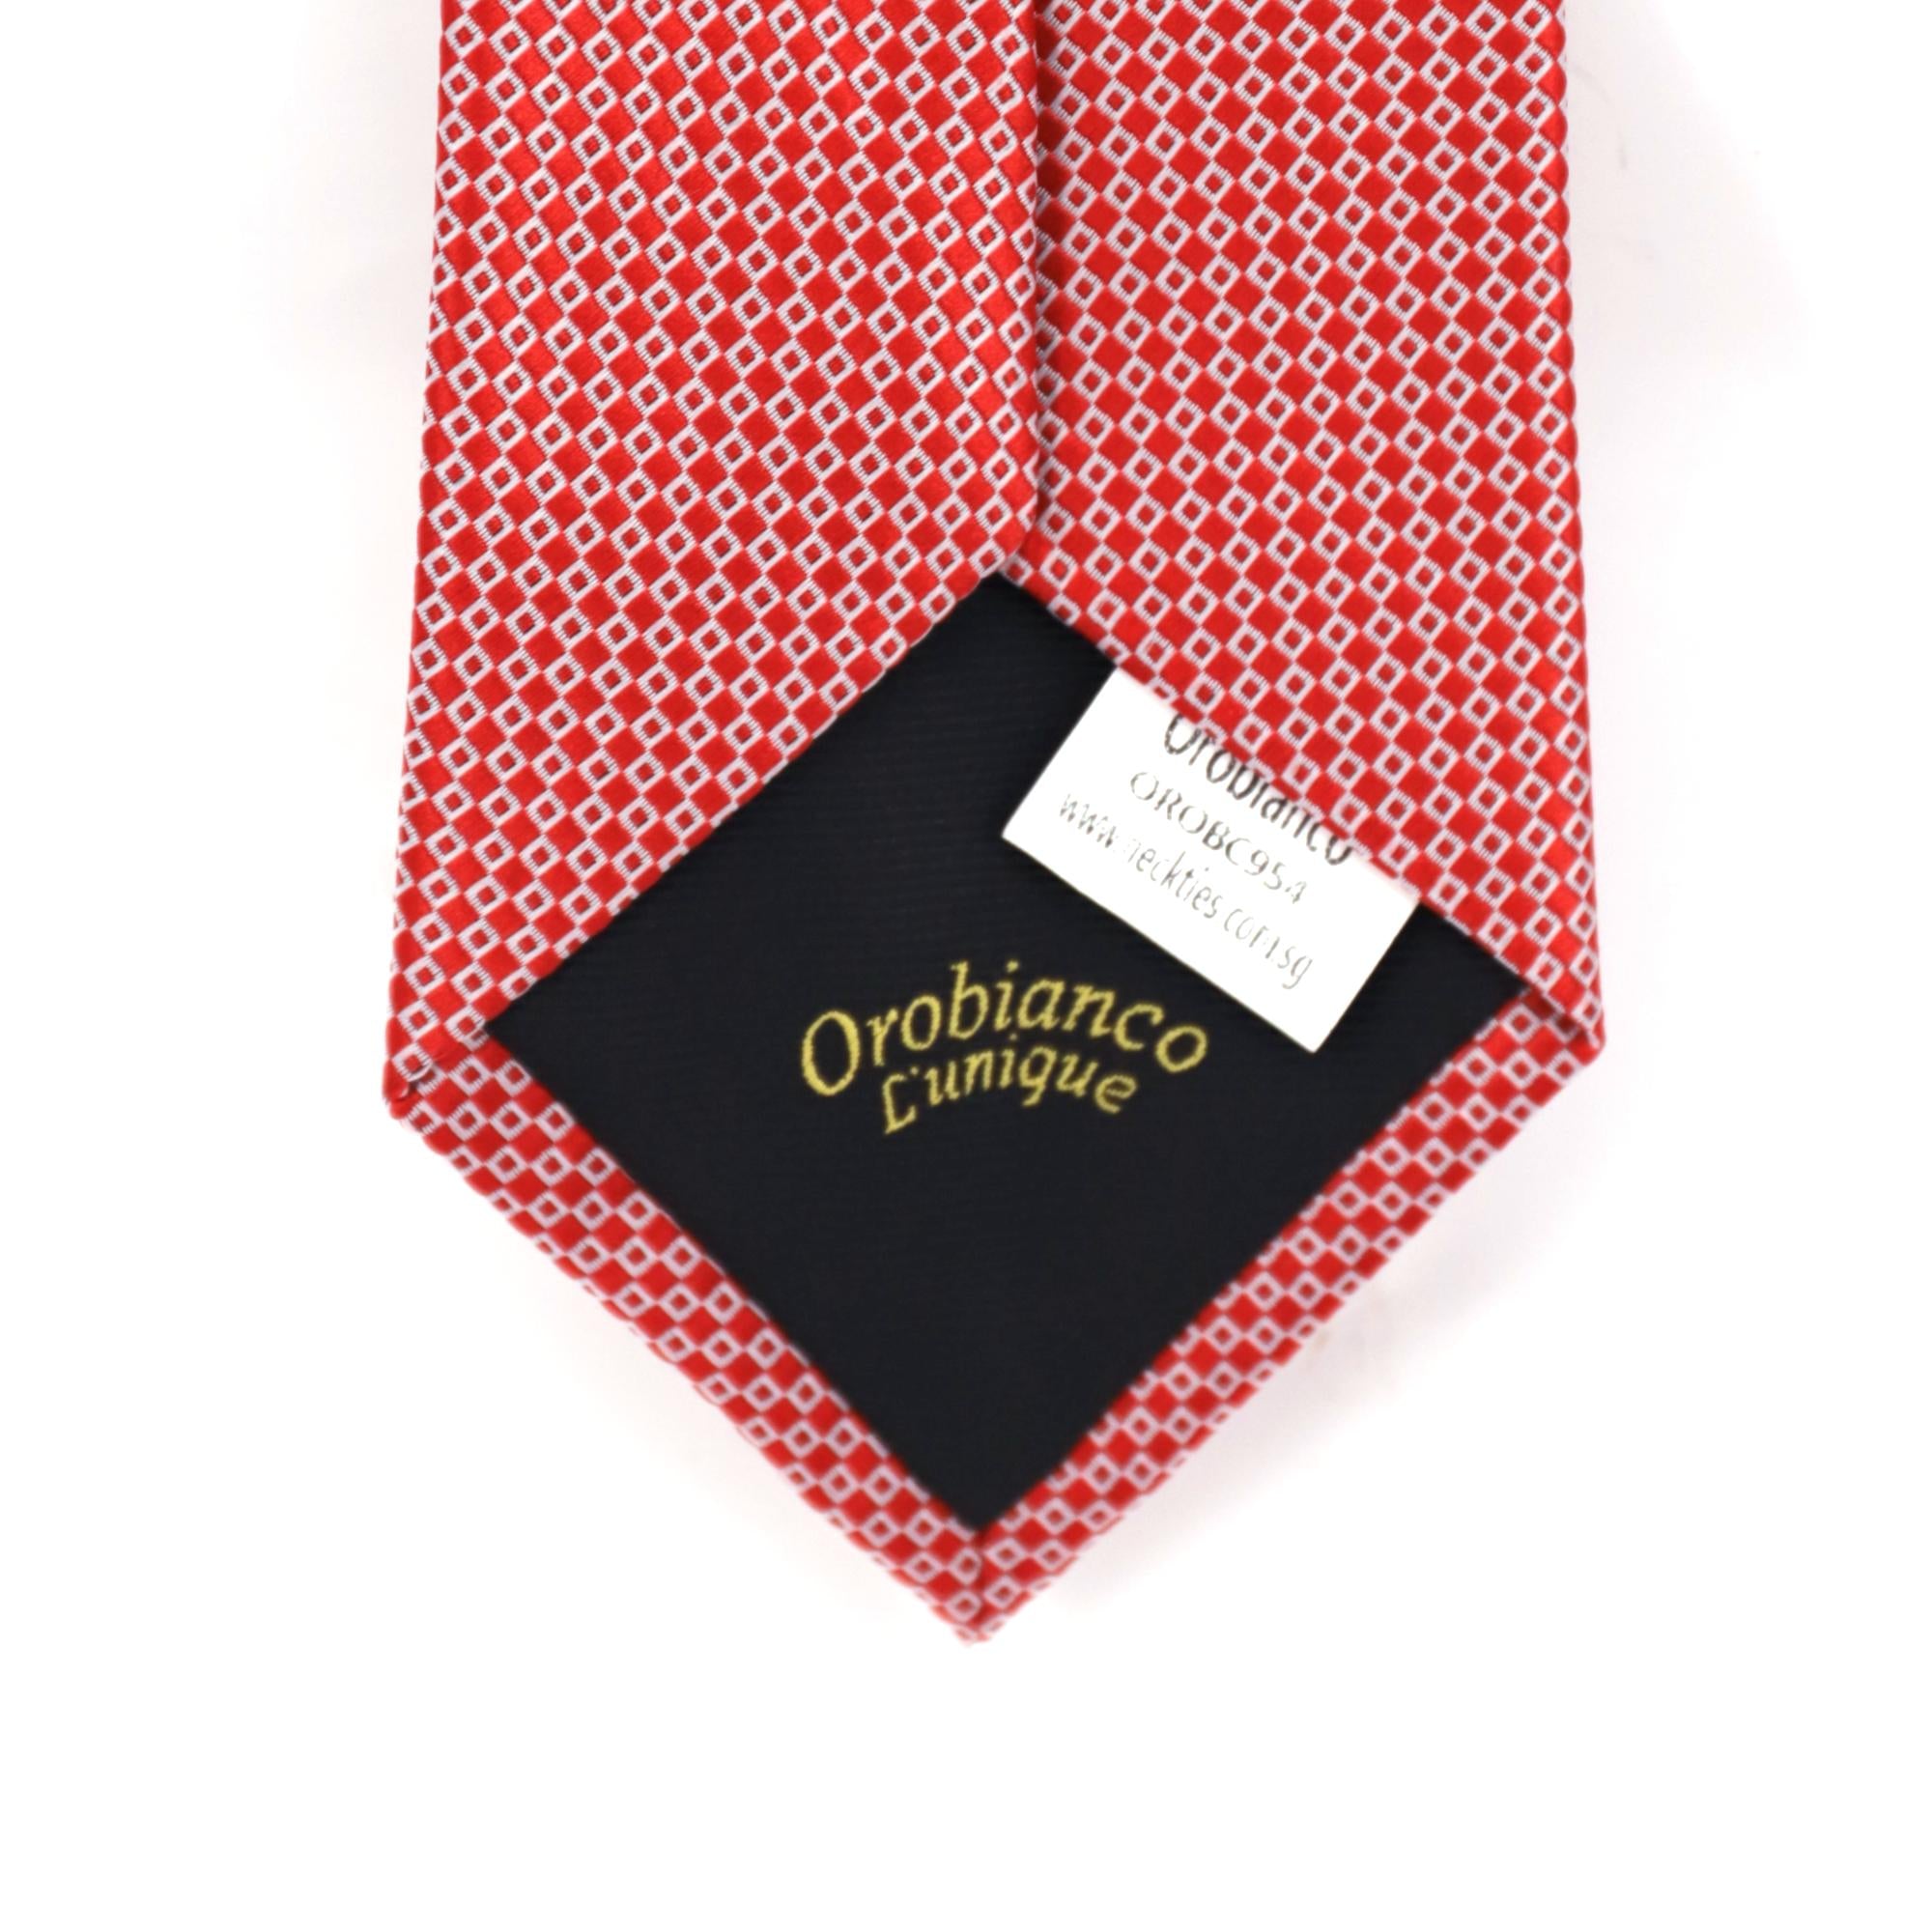 Small squared geometric necktie in Red